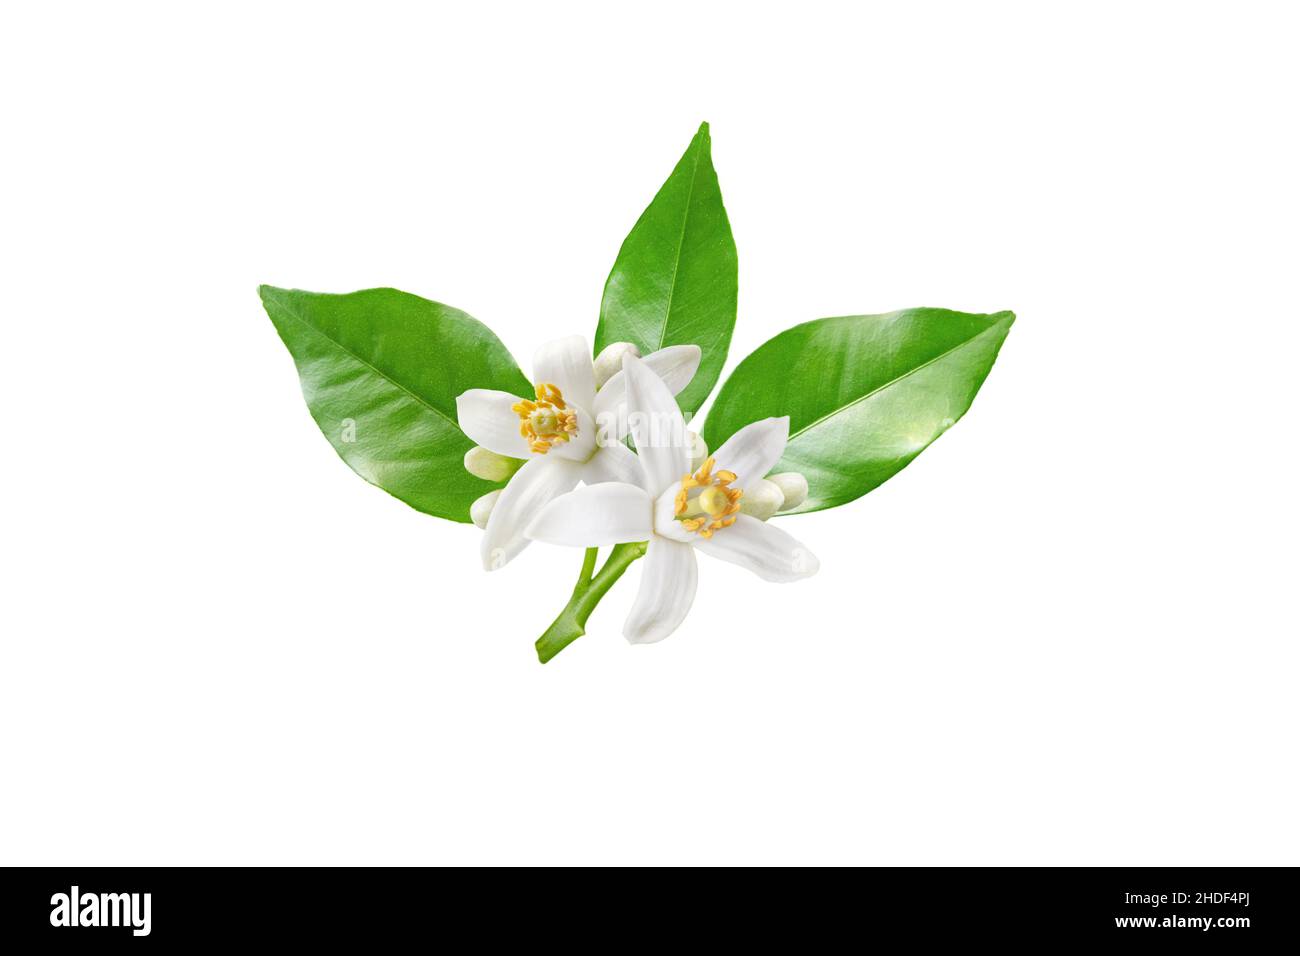 Neroli blossom branch with white flowers, buds and leaves isolated on white. Orange tree citrus bloom. Stock Photo